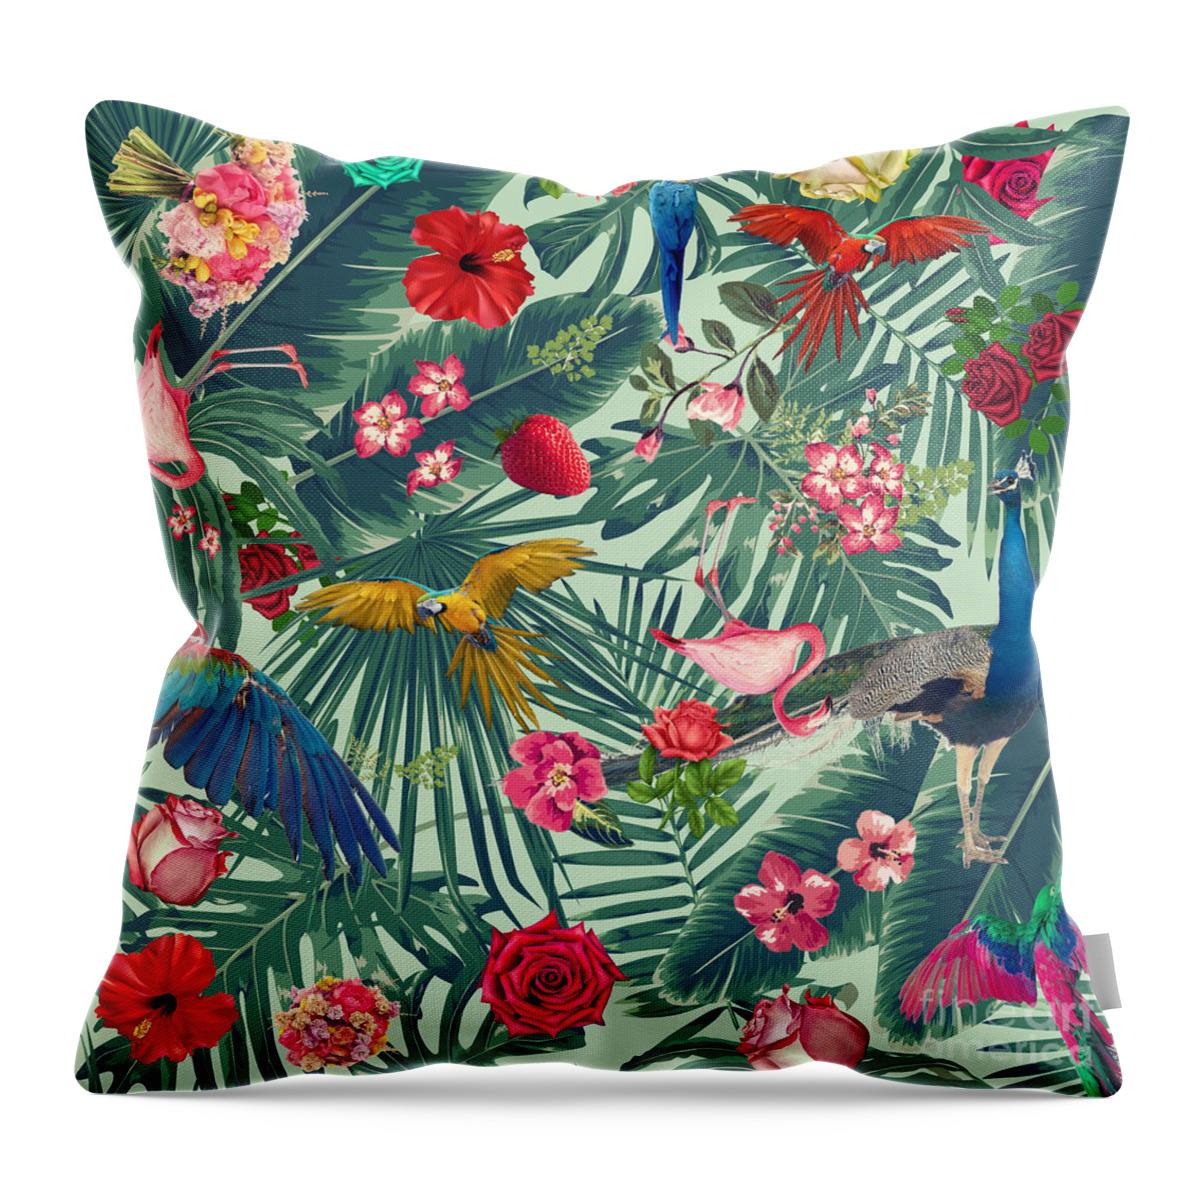 Nature Pattern Throw Pillow featuring the digital art Green Tropical Paradise by Mark Ashkenazi